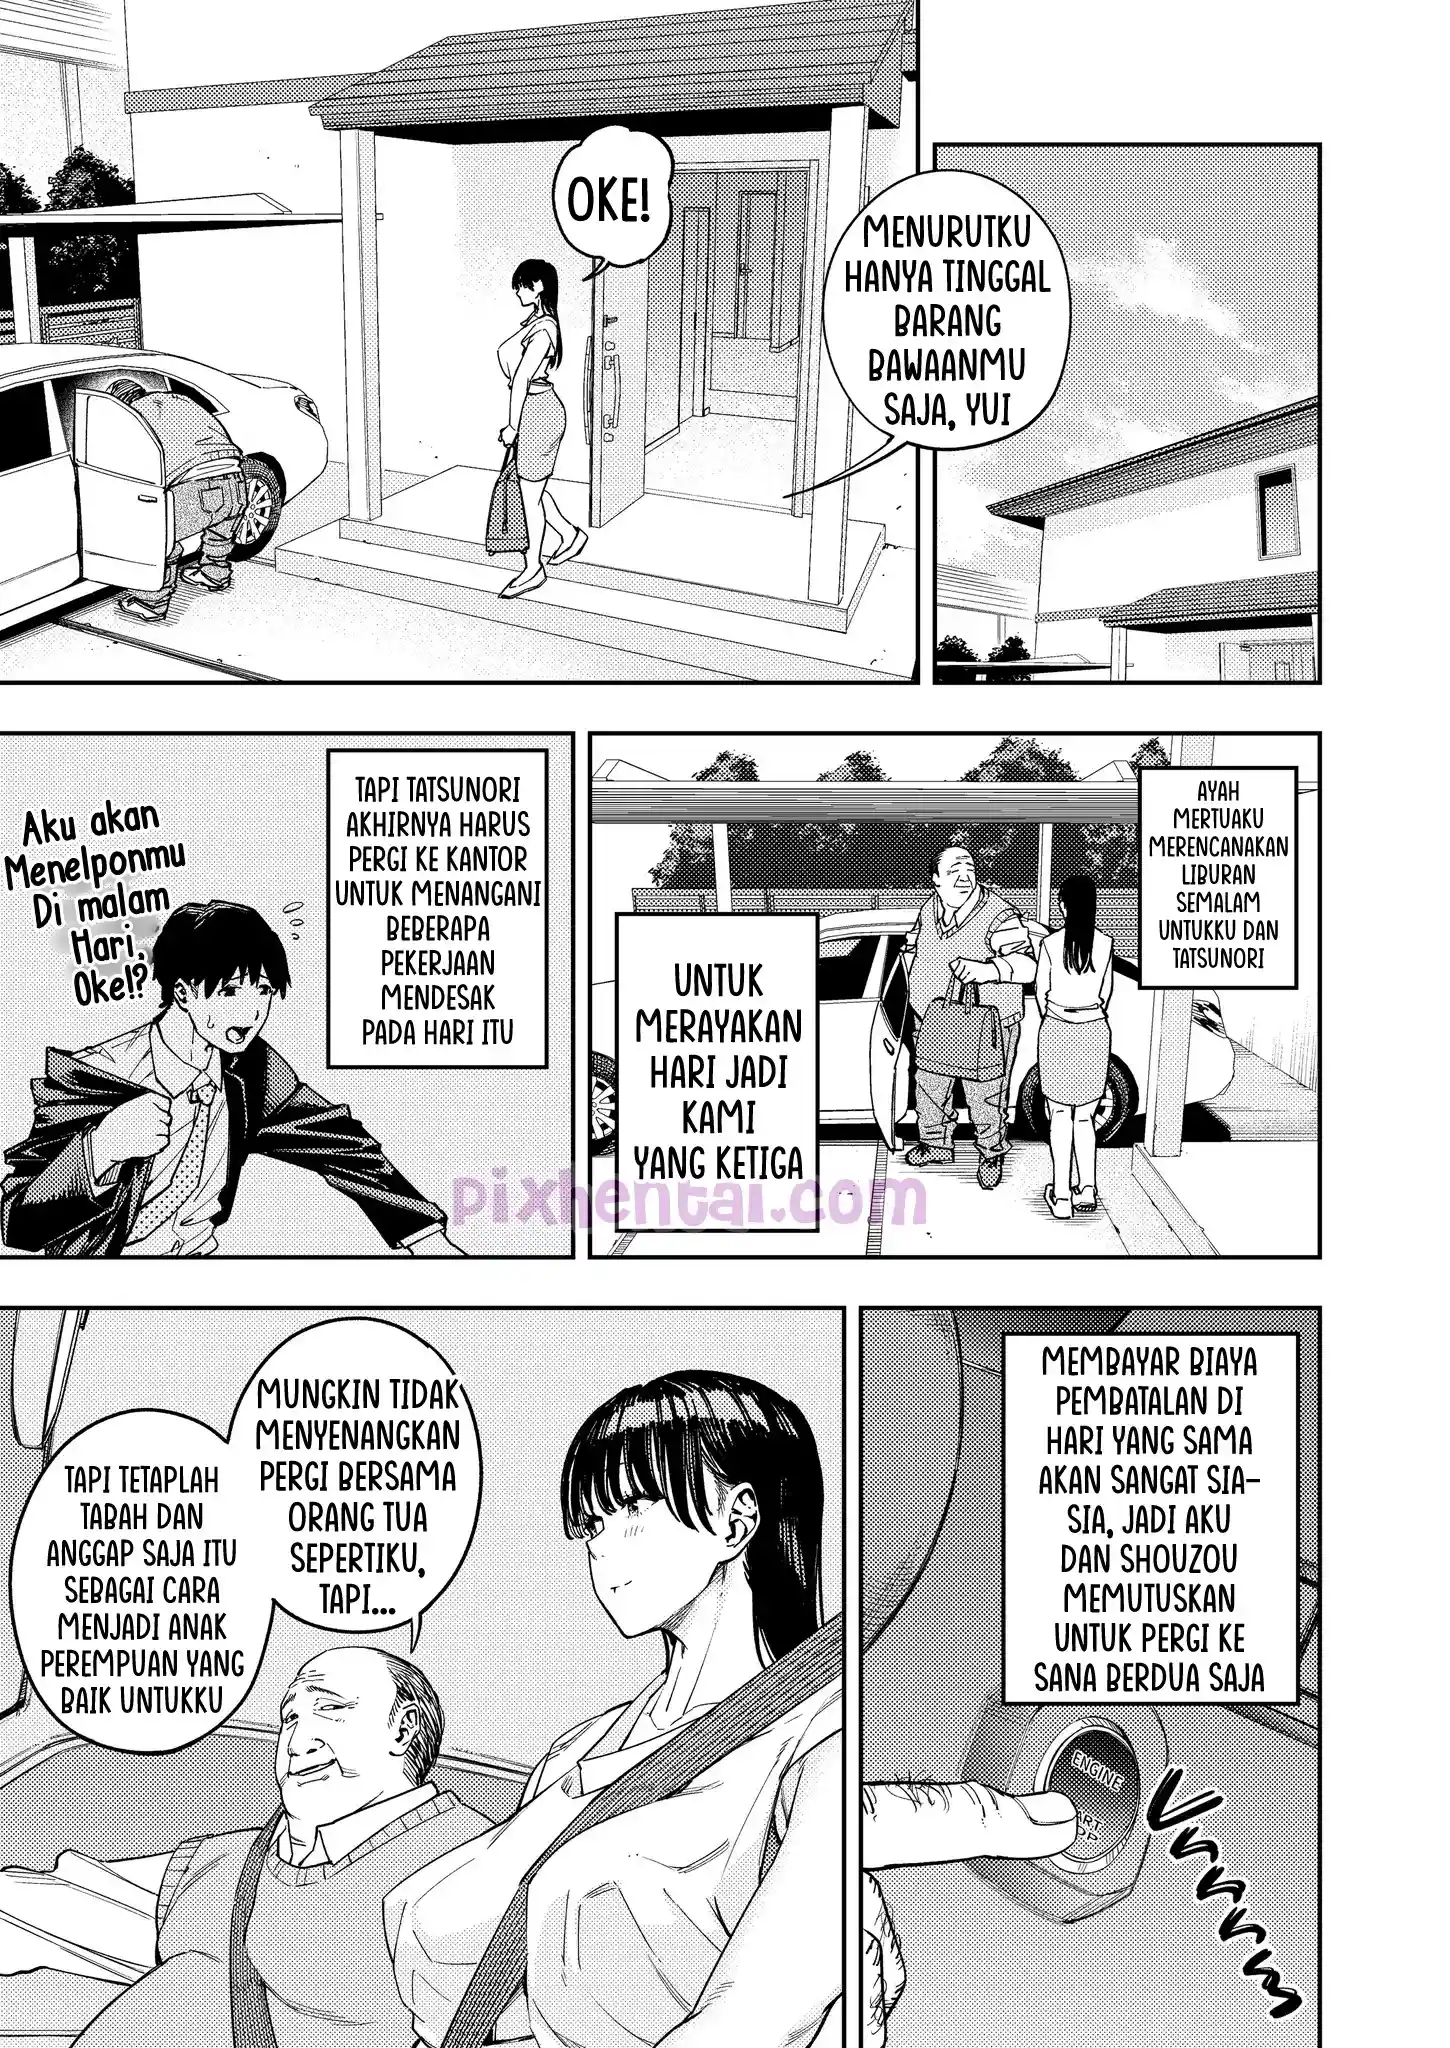 Komik hentai xxx manga sex bokep Screwed by Step-Dad All About Yui 1 12